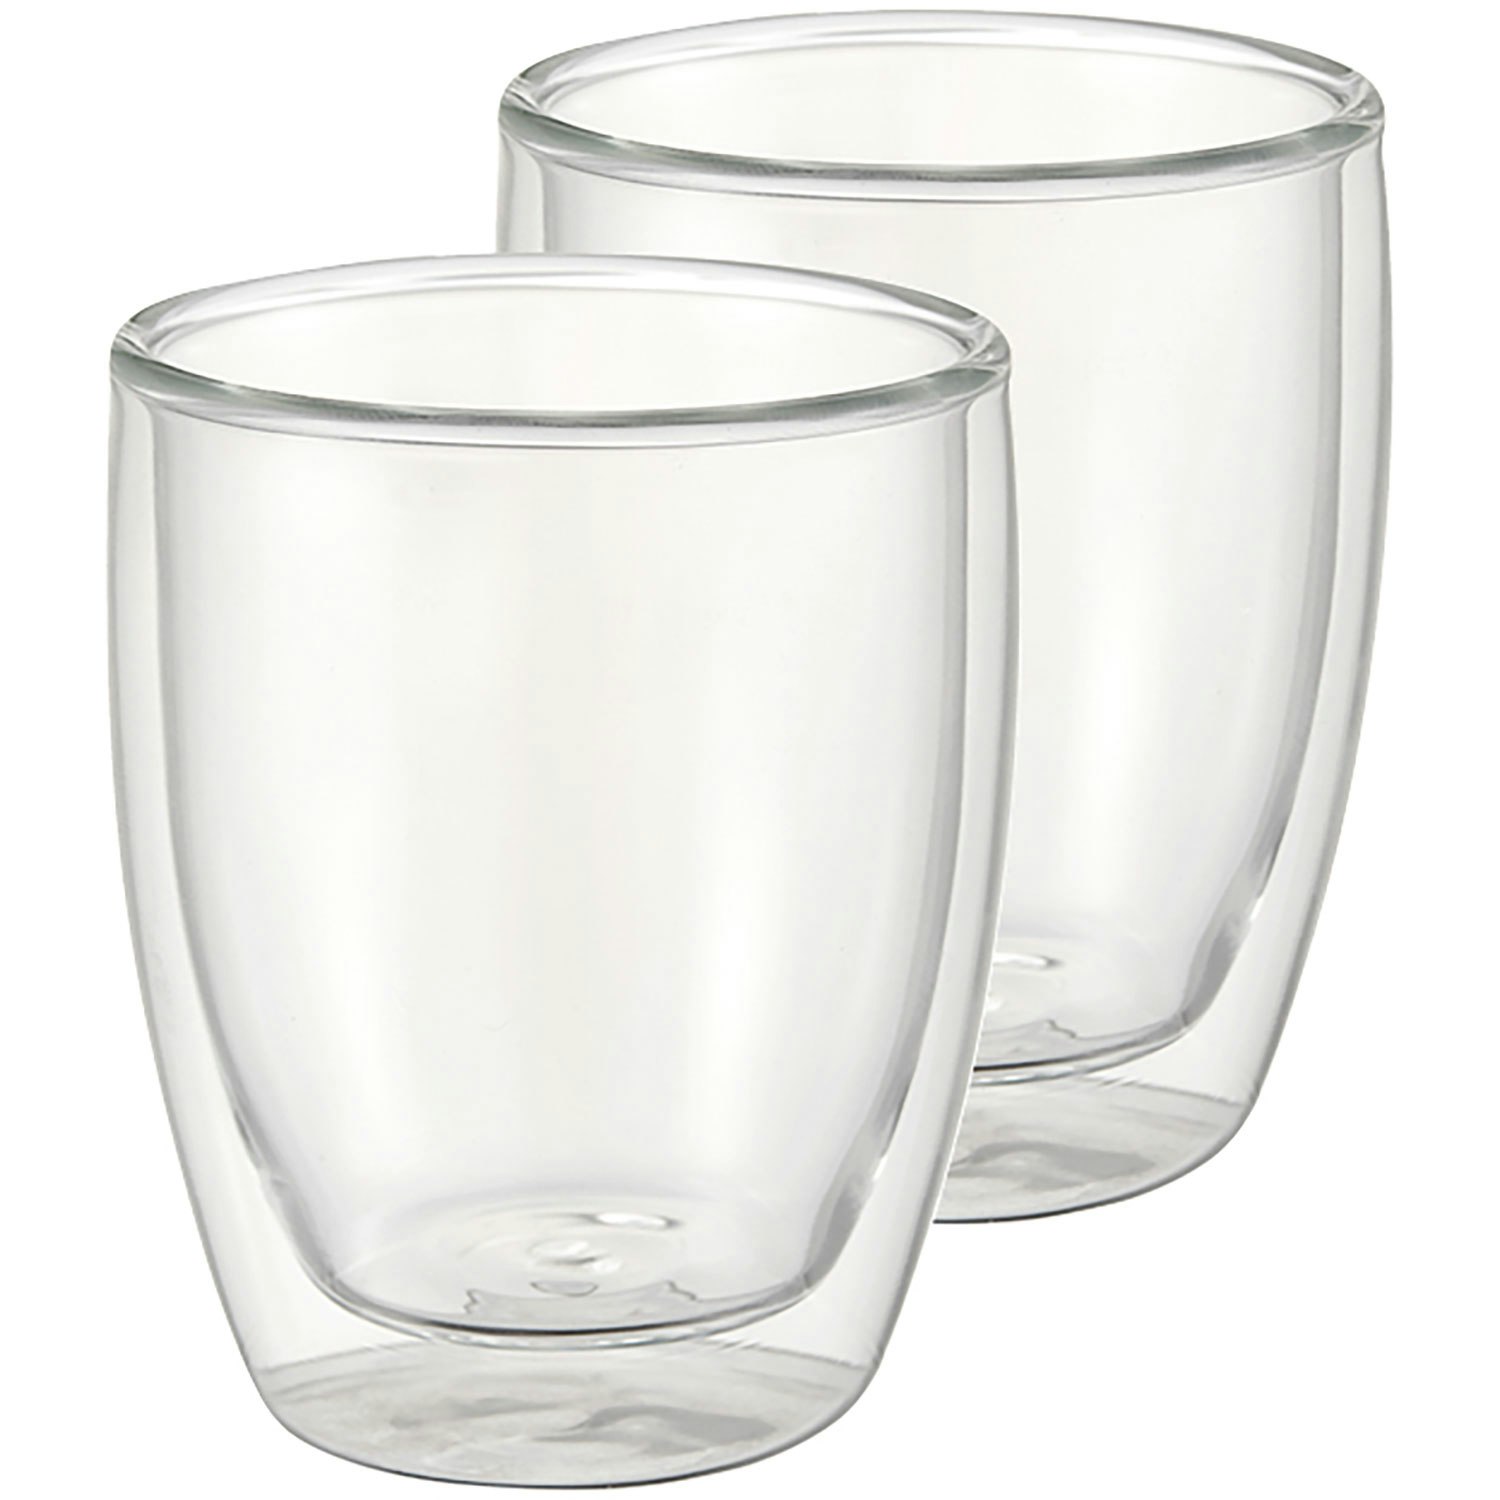 Melior Double Wall Cup, Double Wall Cup